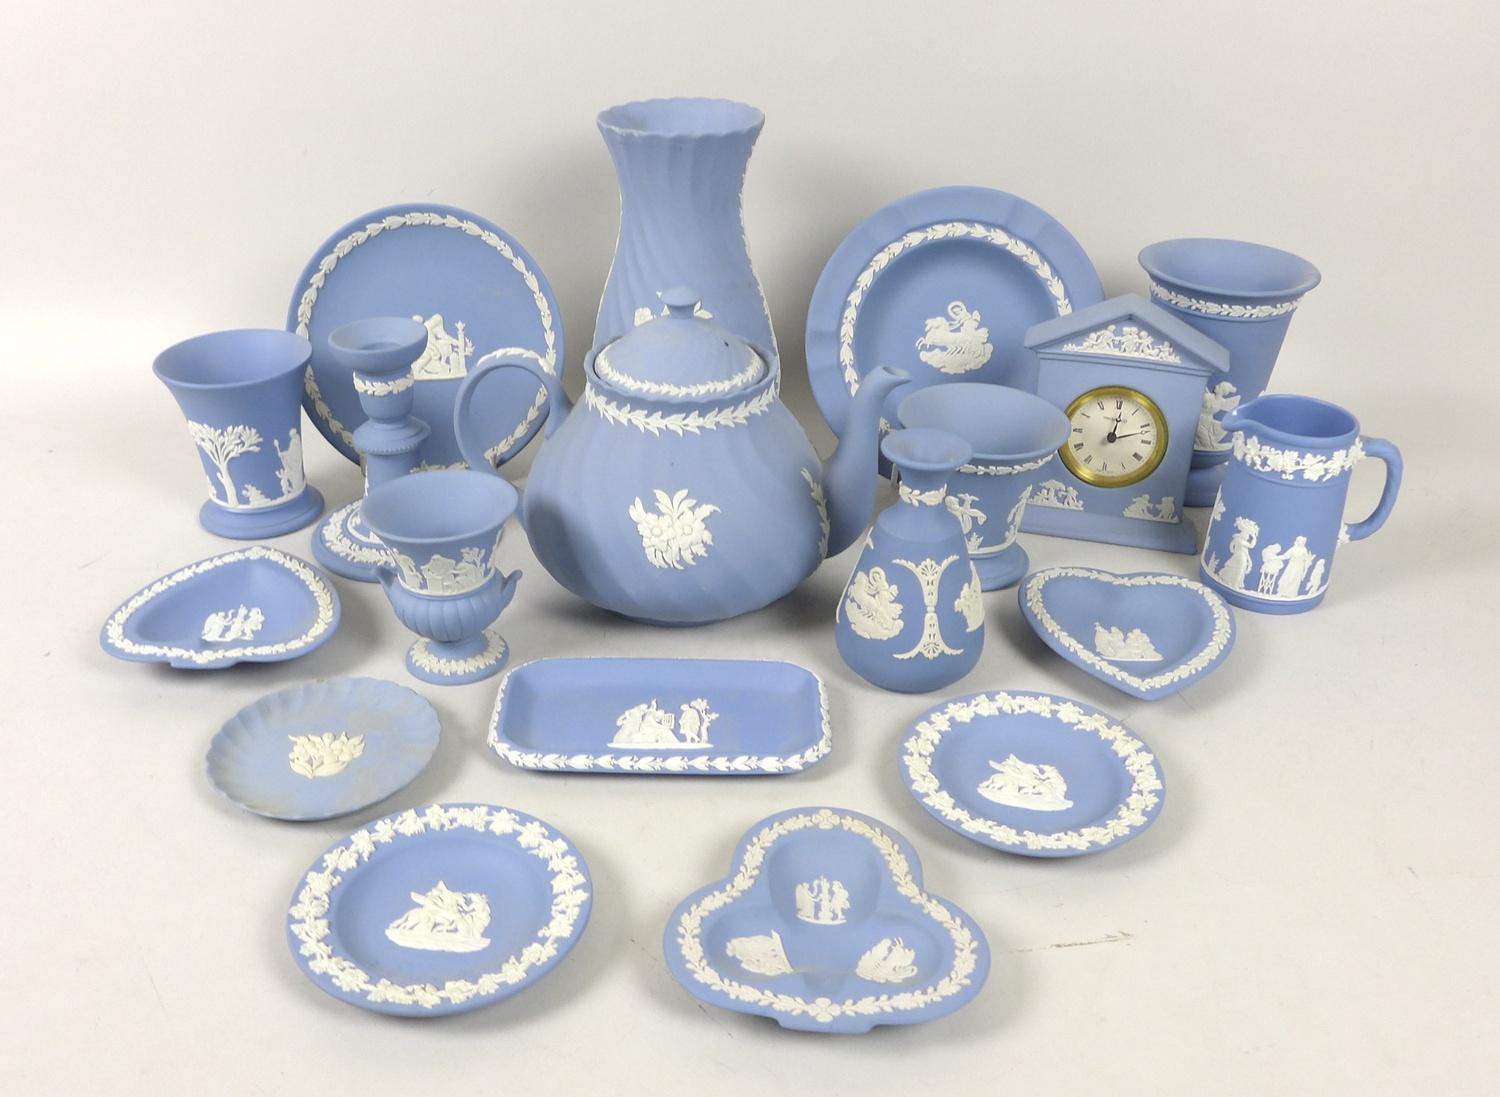 A collection of Wedgwood Jasperware, mostly in blue and white, including a teapot, 15cm high, a